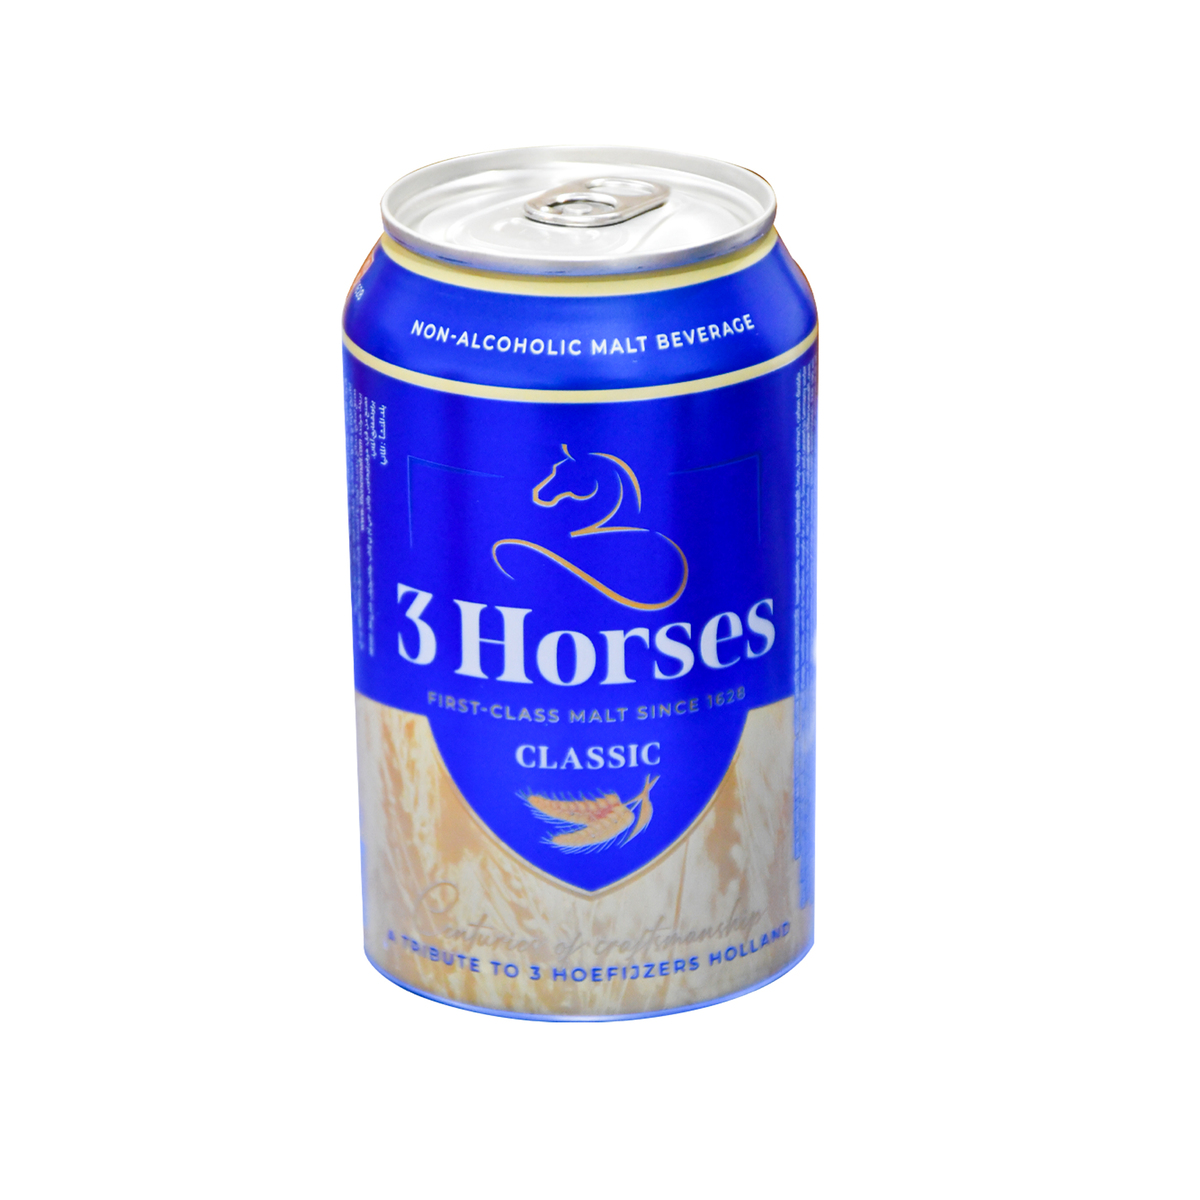 Buy 3 Horses Non-Alcoholic Malt Beverages 330ml x 6 Pieces Online at Best Price | Non Alcoholic Beer | Lulu Kuwait in Kuwait